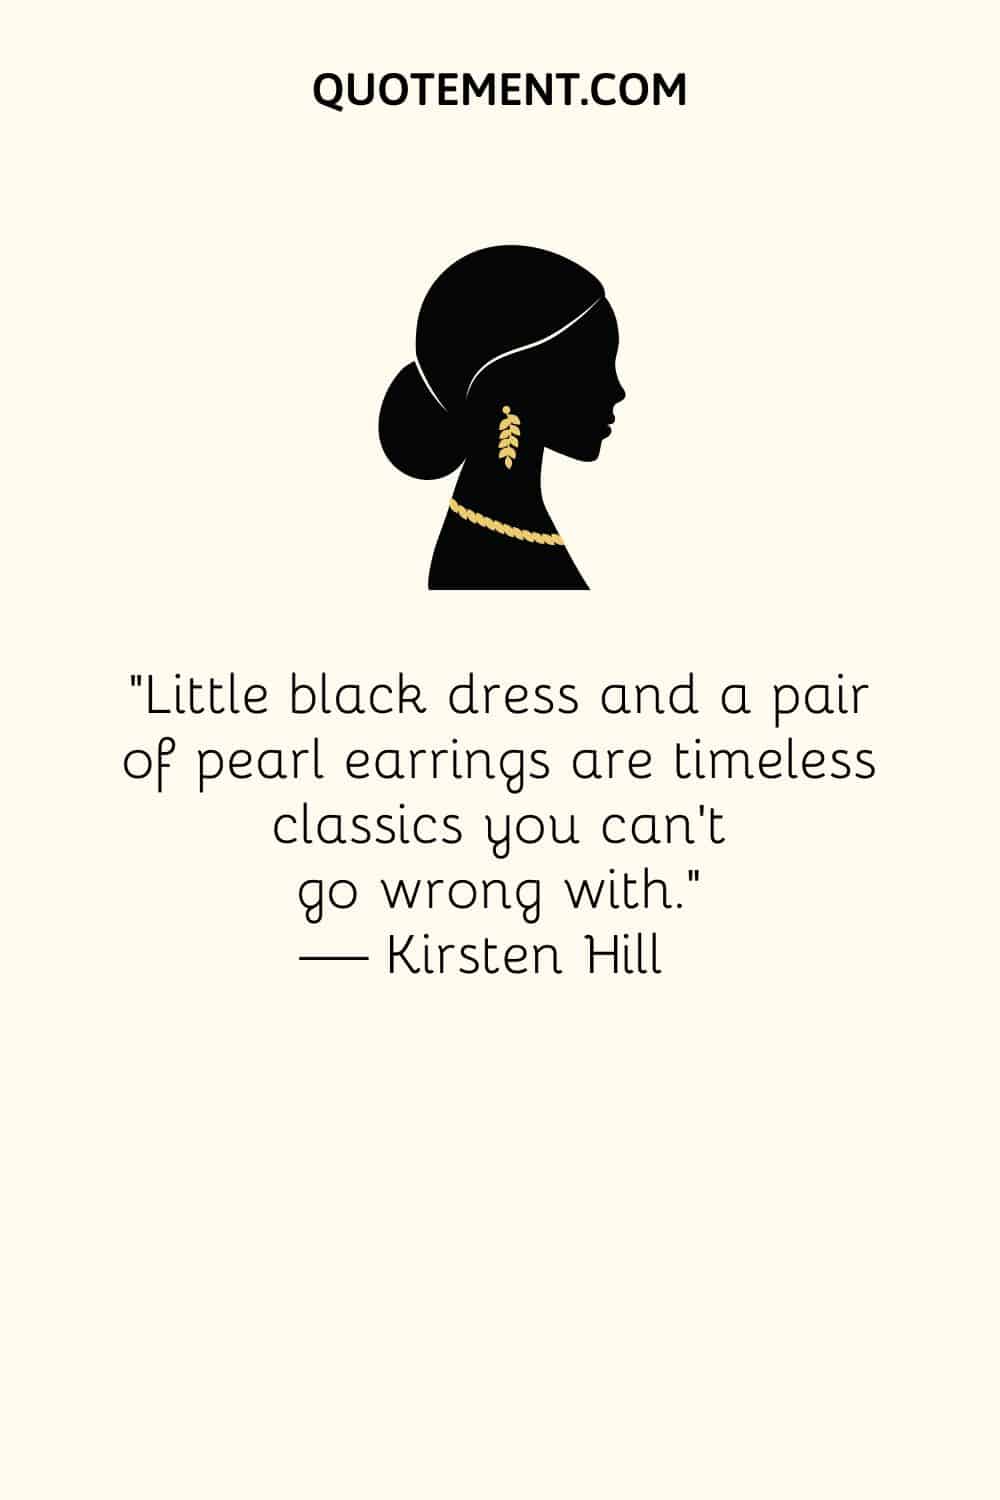 Little black dress and a pair of pearl earrings are timeless classics you can’t go wrong with